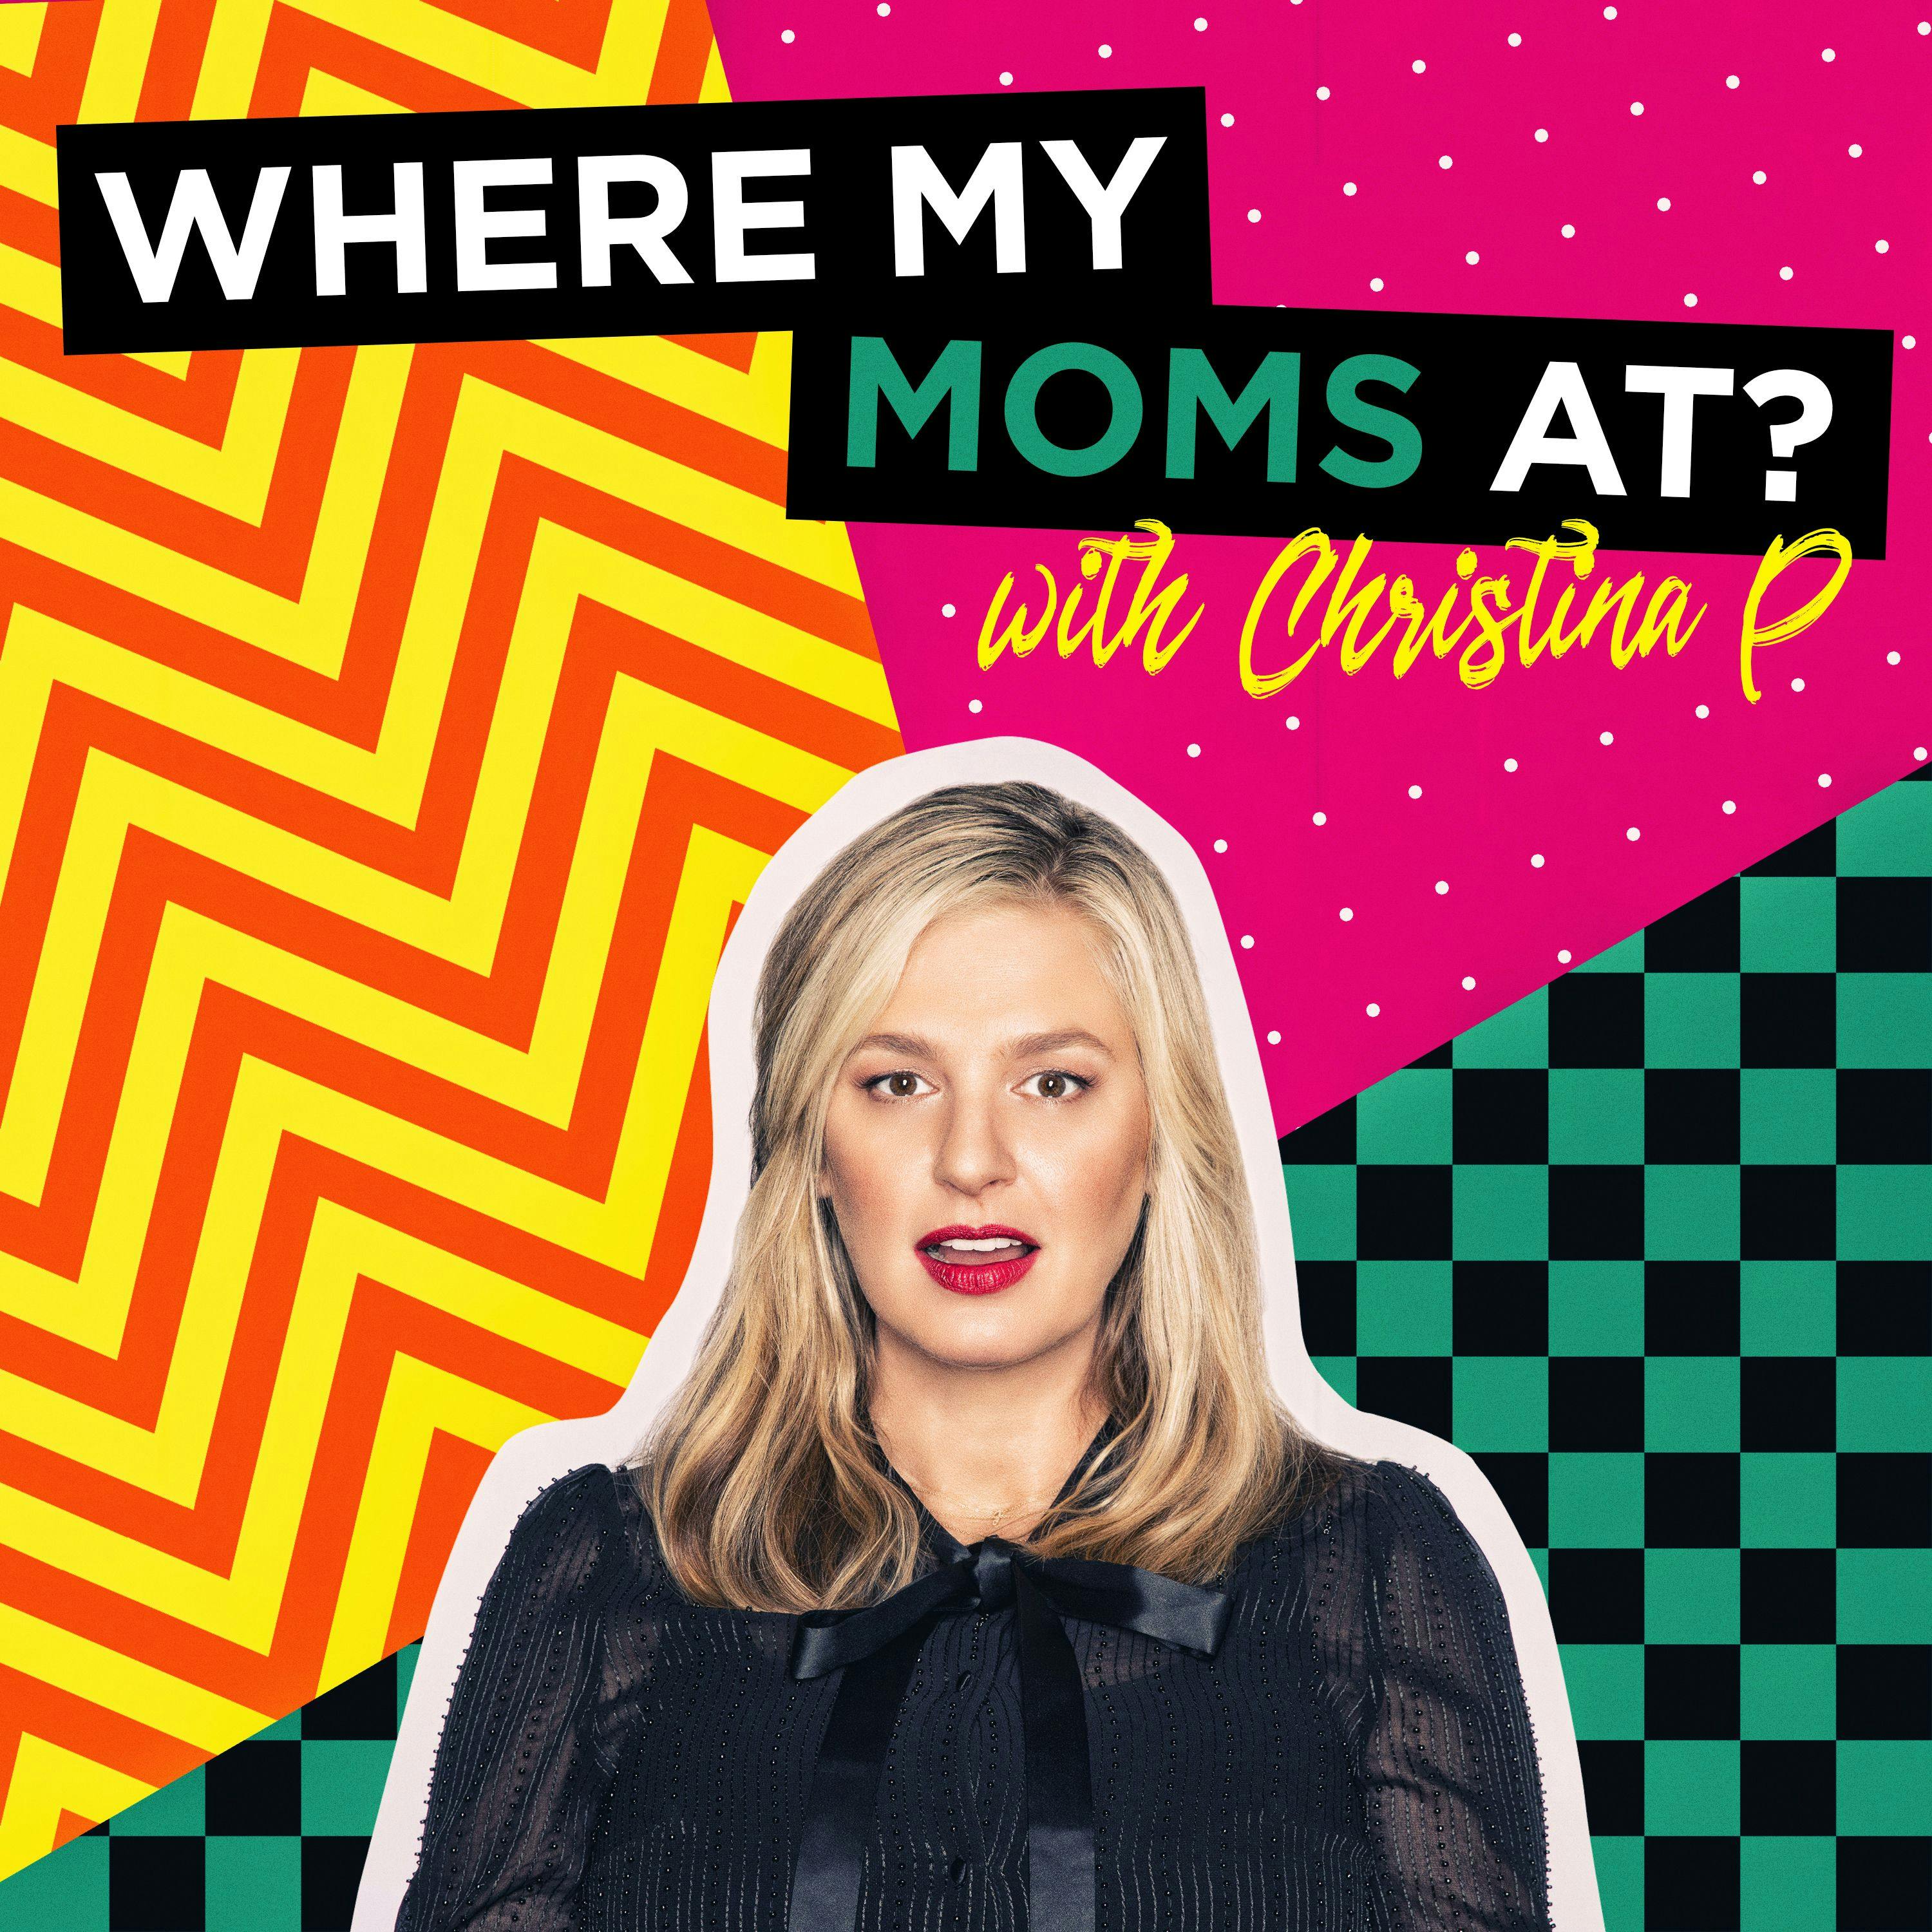 Ep. 113 What They're Made For - Where My Moms At w/ Christina P